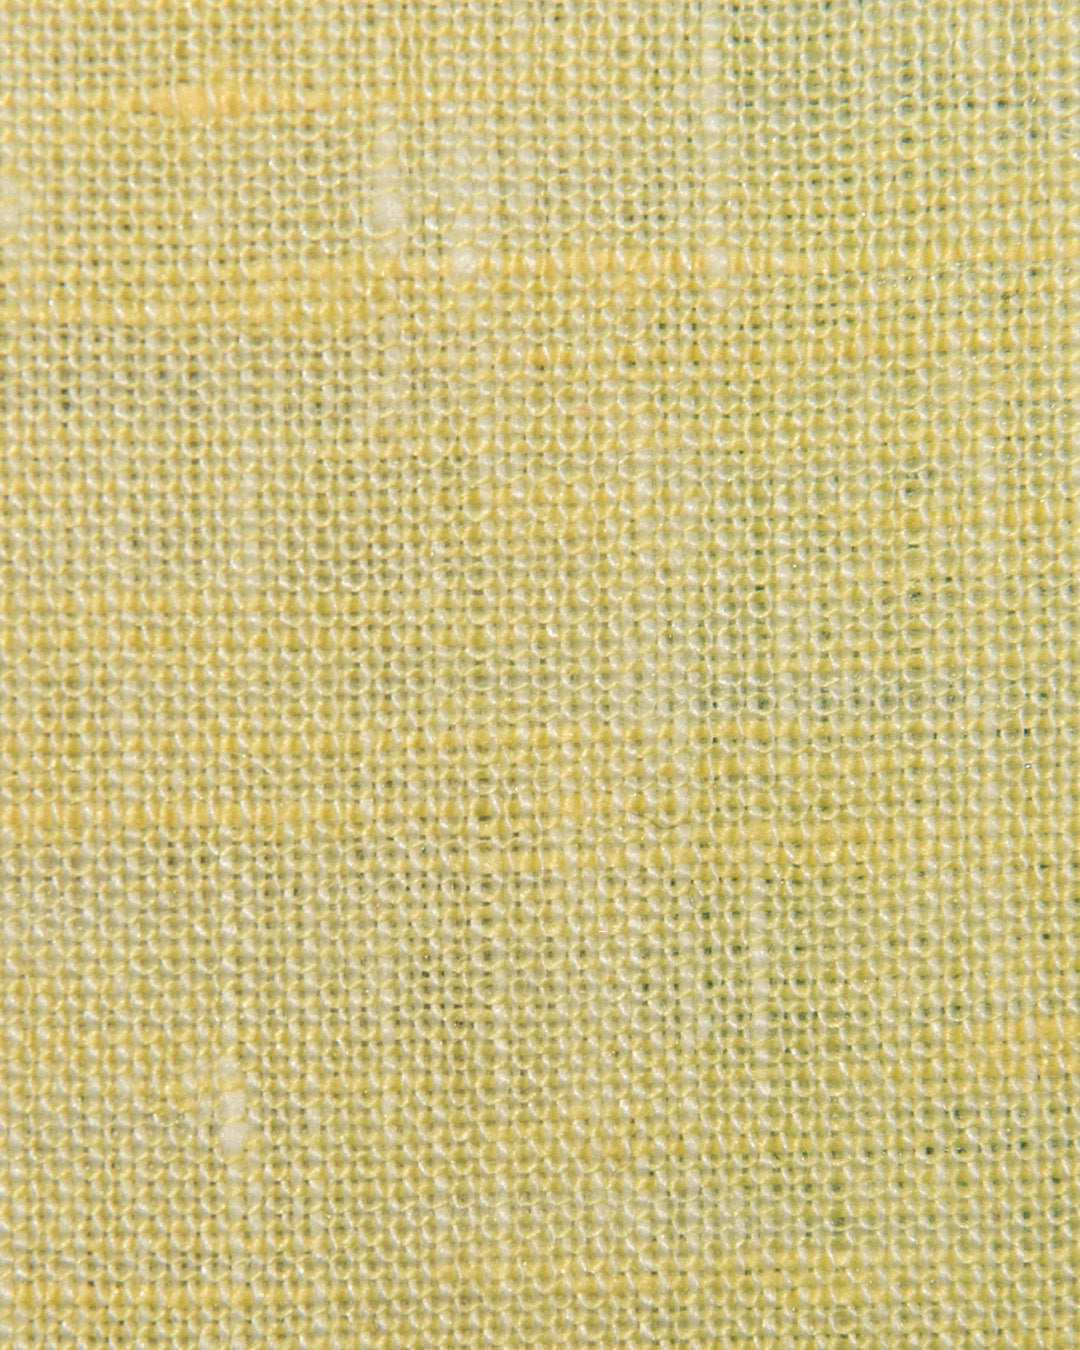 Close up view of custom linen shirt for men in pale yellow